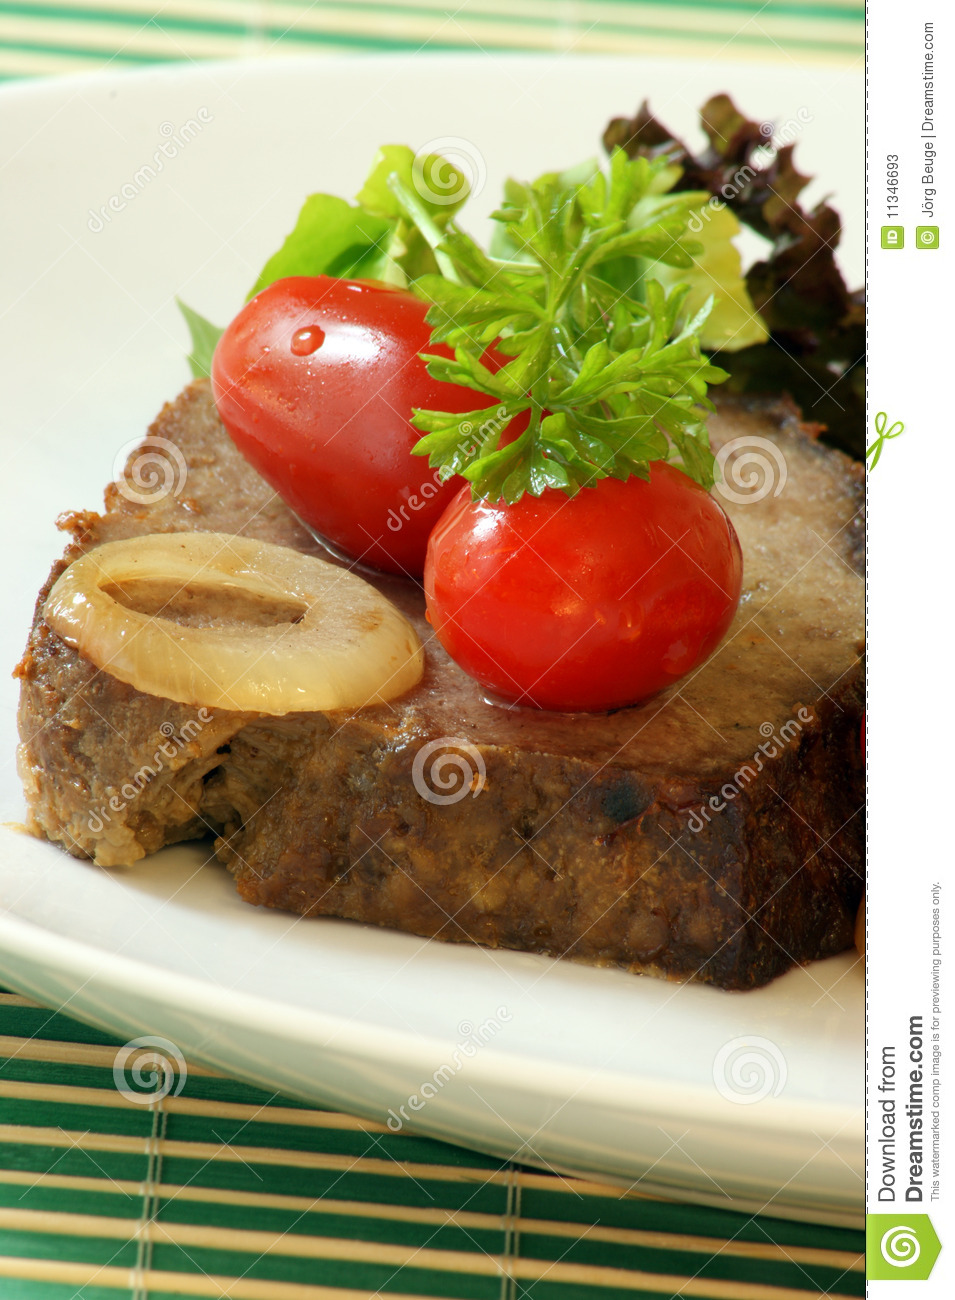 Similar Stock Images Of   Sliced Meat Loaf With Parsley On A Plate